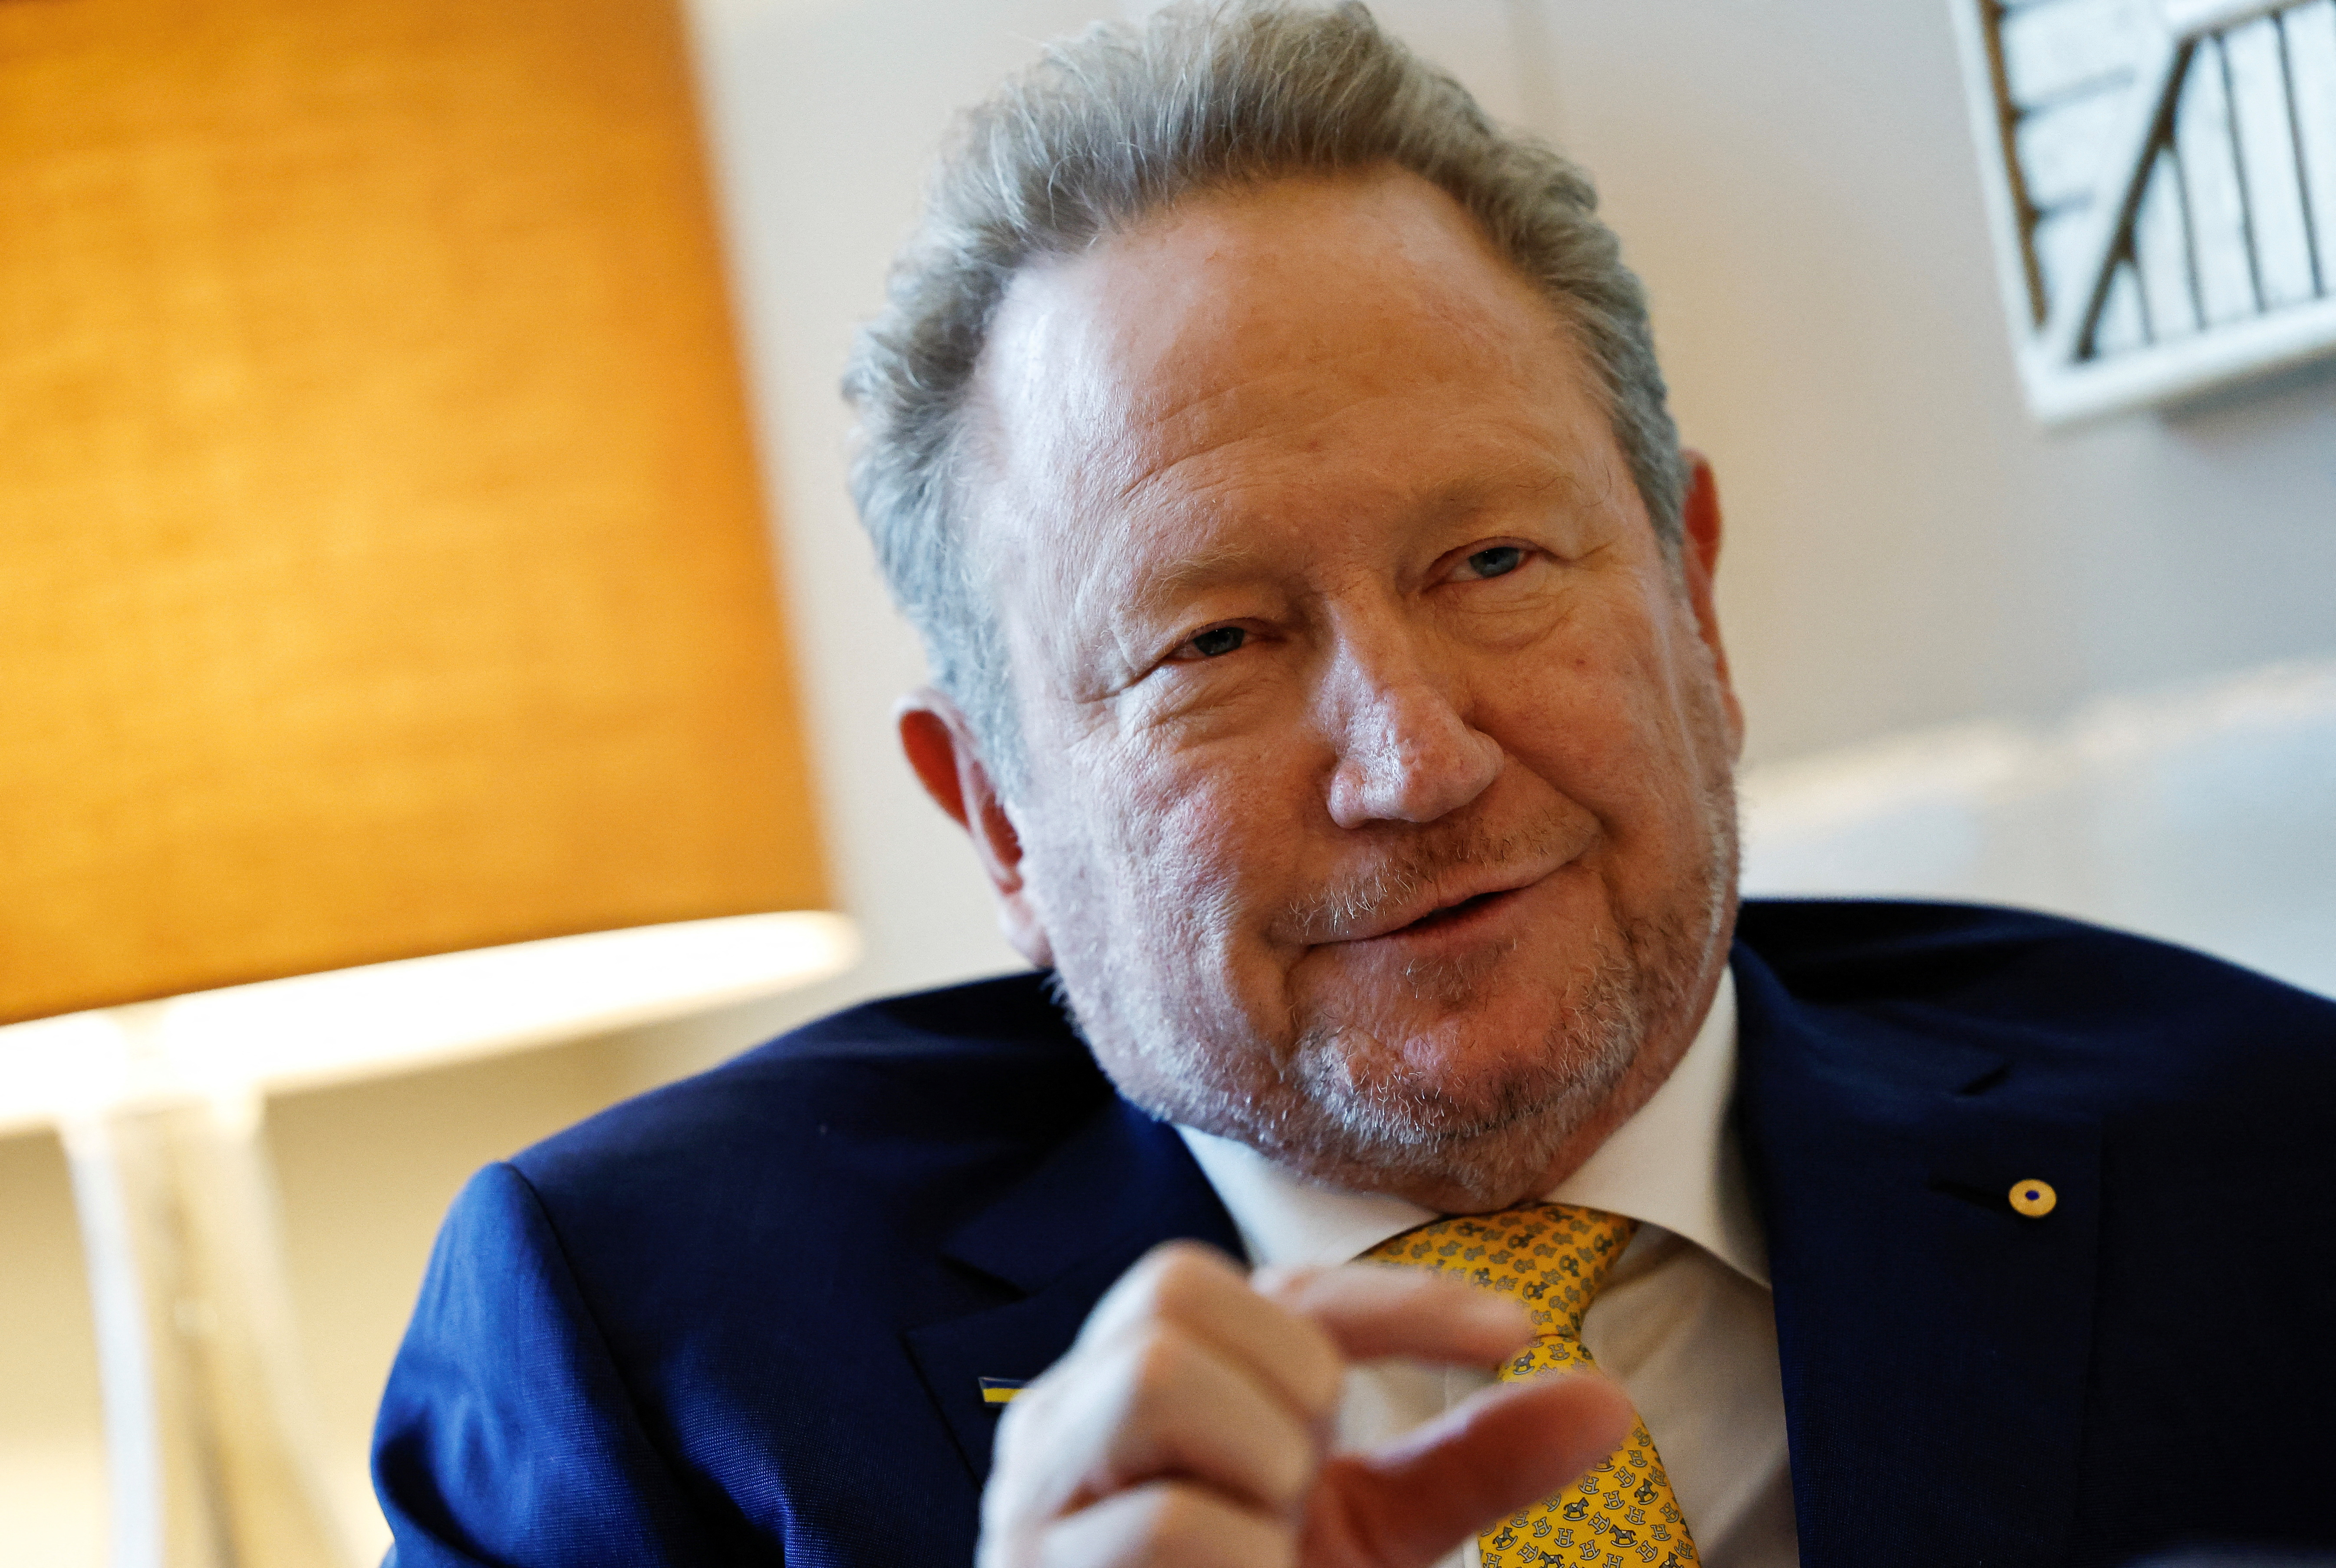 Fortescue's founder and executive chairman Andrew Forrest speaks during an interview with Reuters, in Beijing